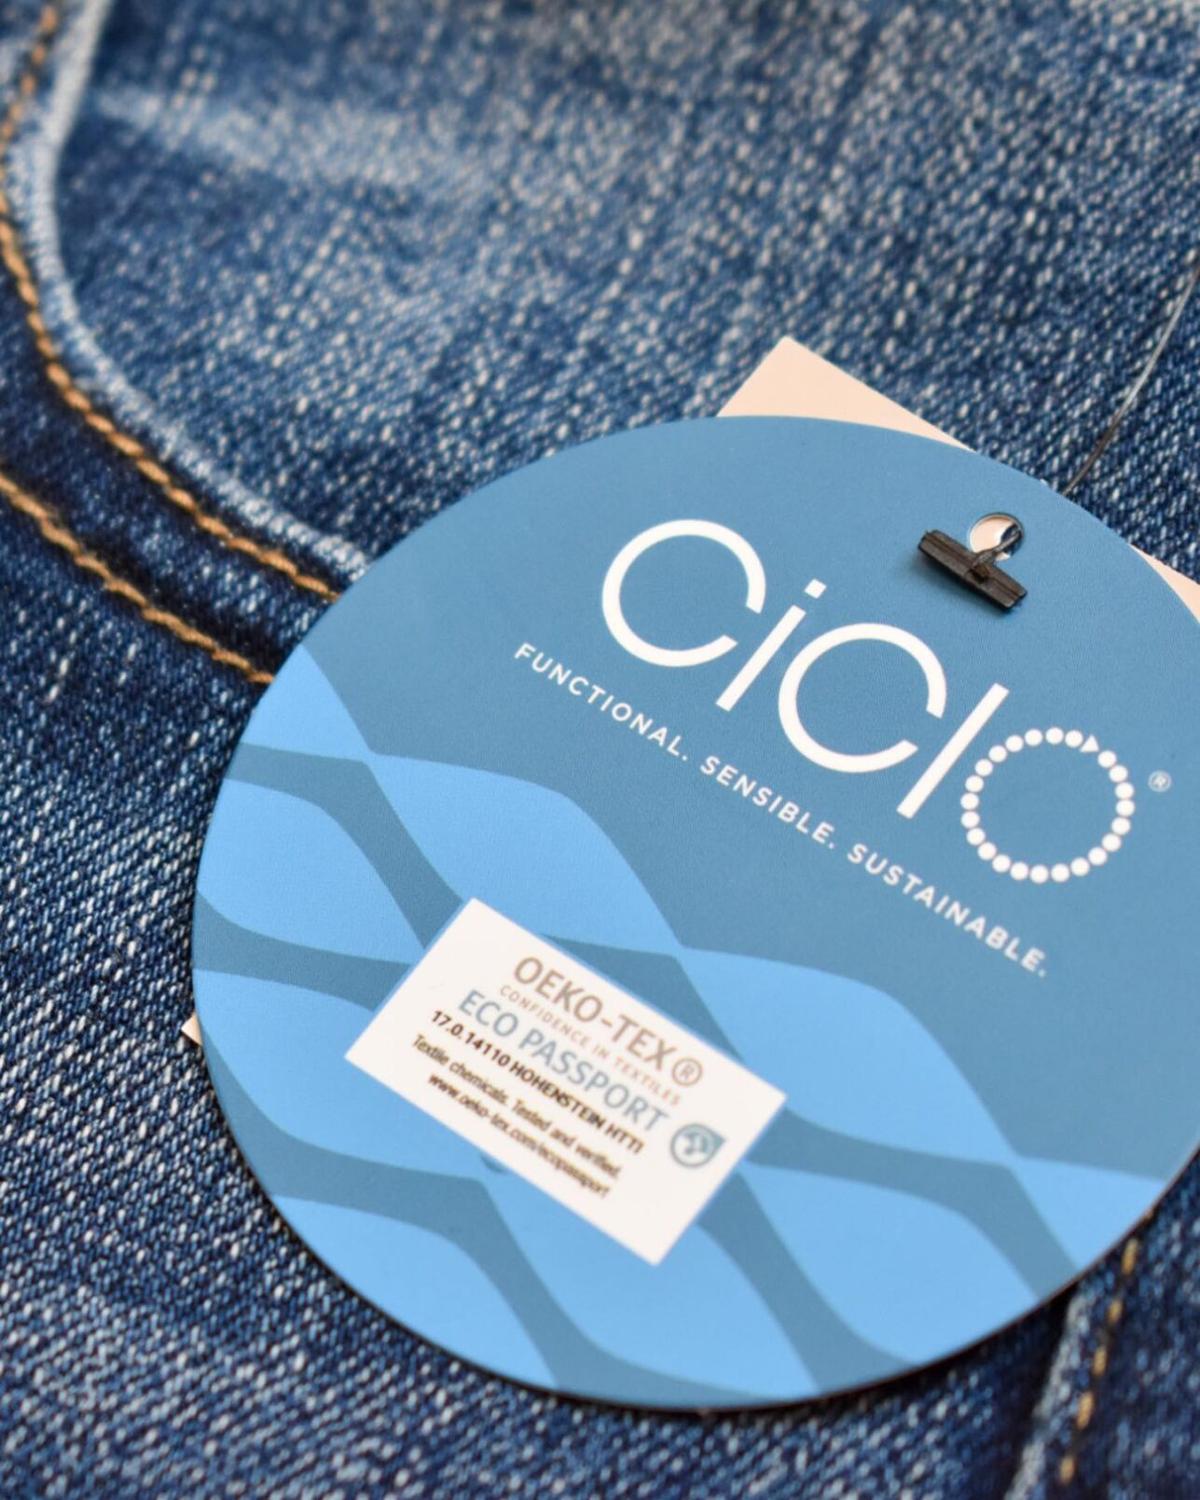 CiCLO® brand from Parkdale, Intrinsic growing globally while reducing  plastic microfiber pollution, Industry News